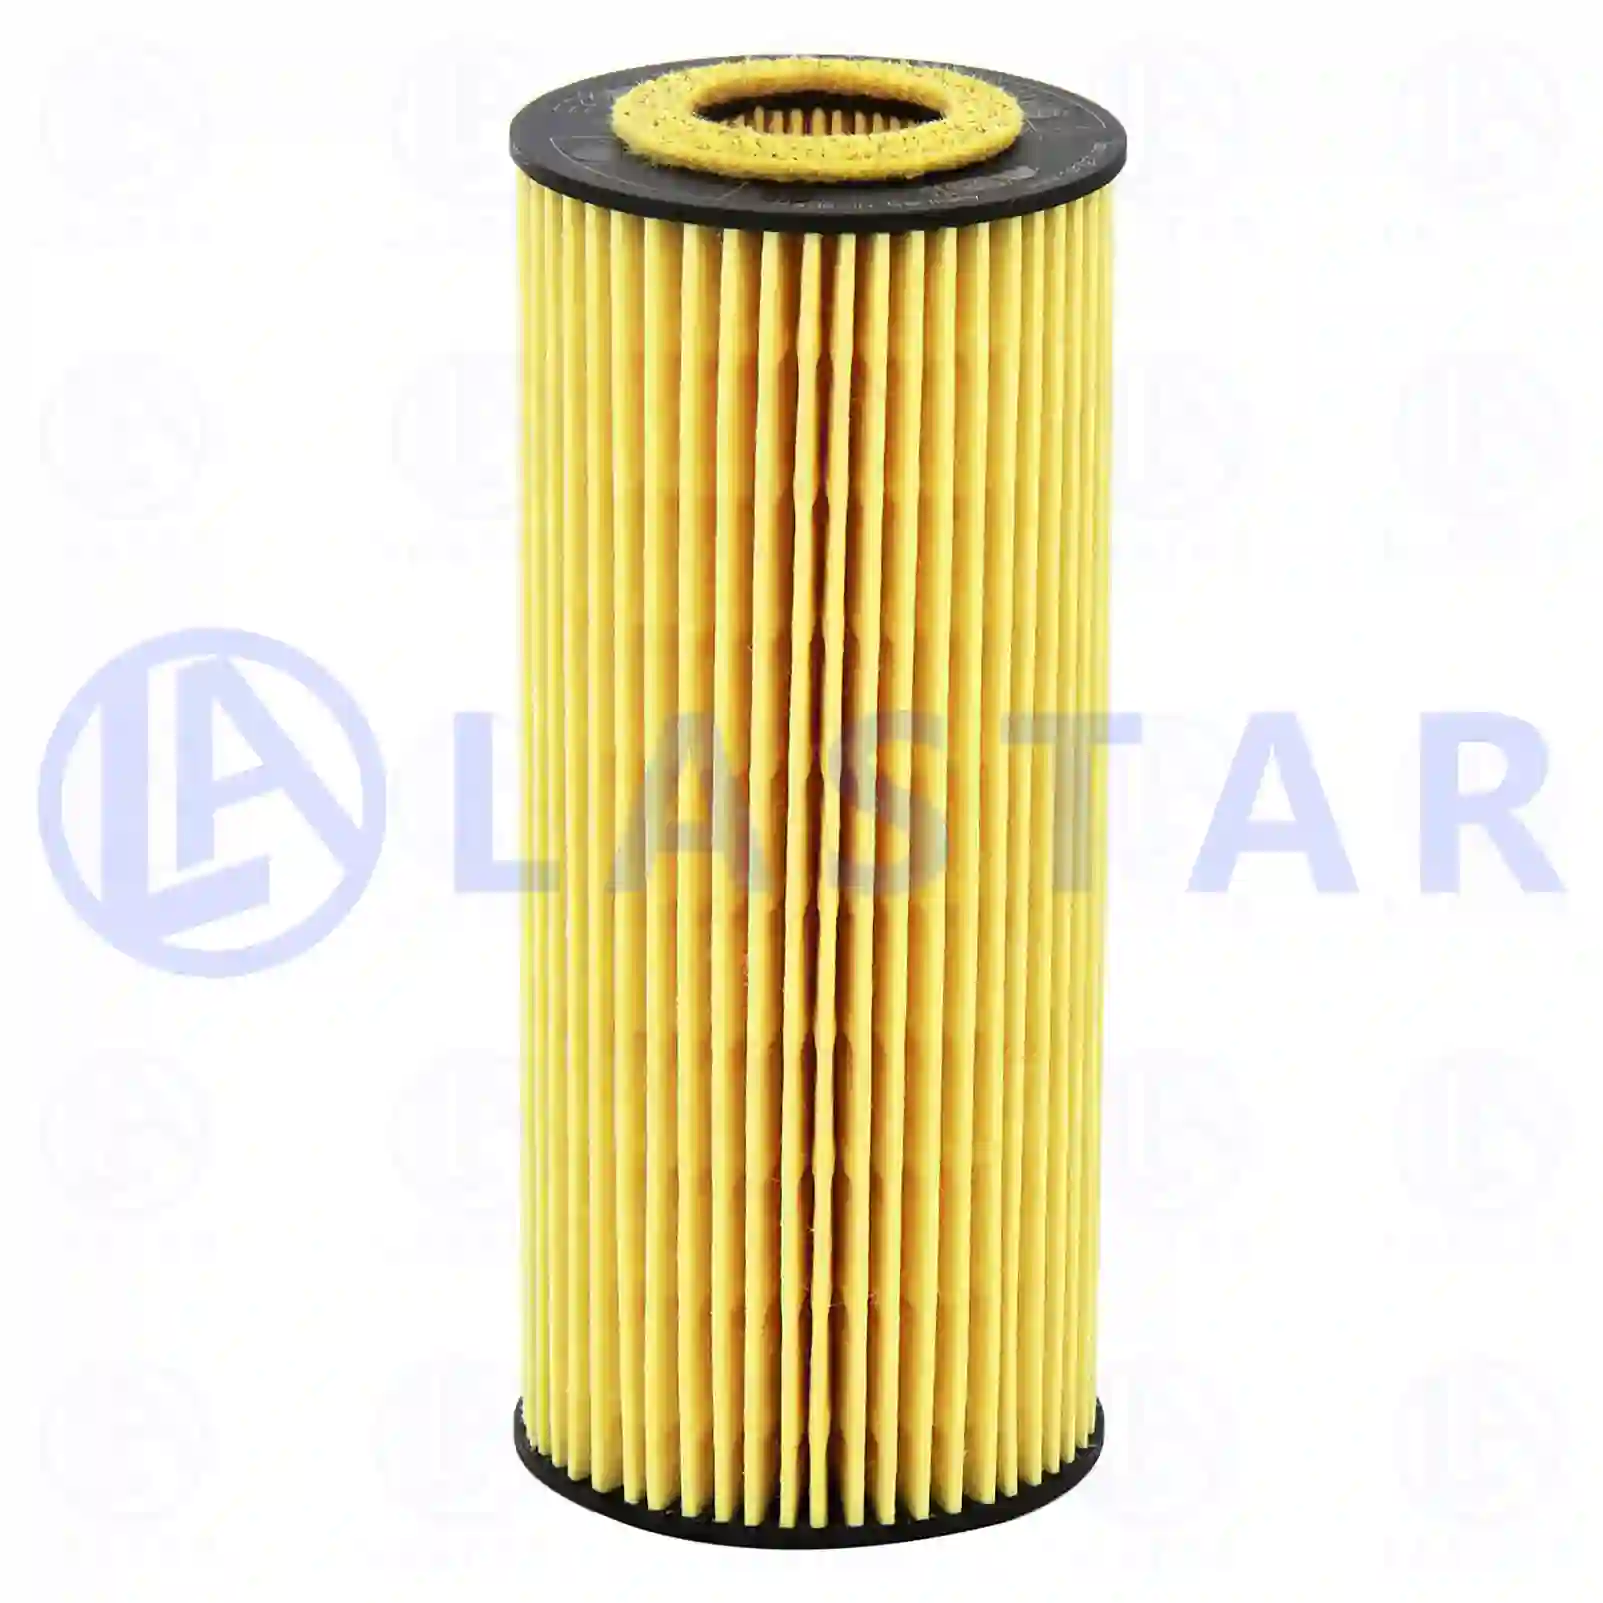  Oil filter insert, gearbox || Lastar Spare Part | Truck Spare Parts, Auotomotive Spare Parts